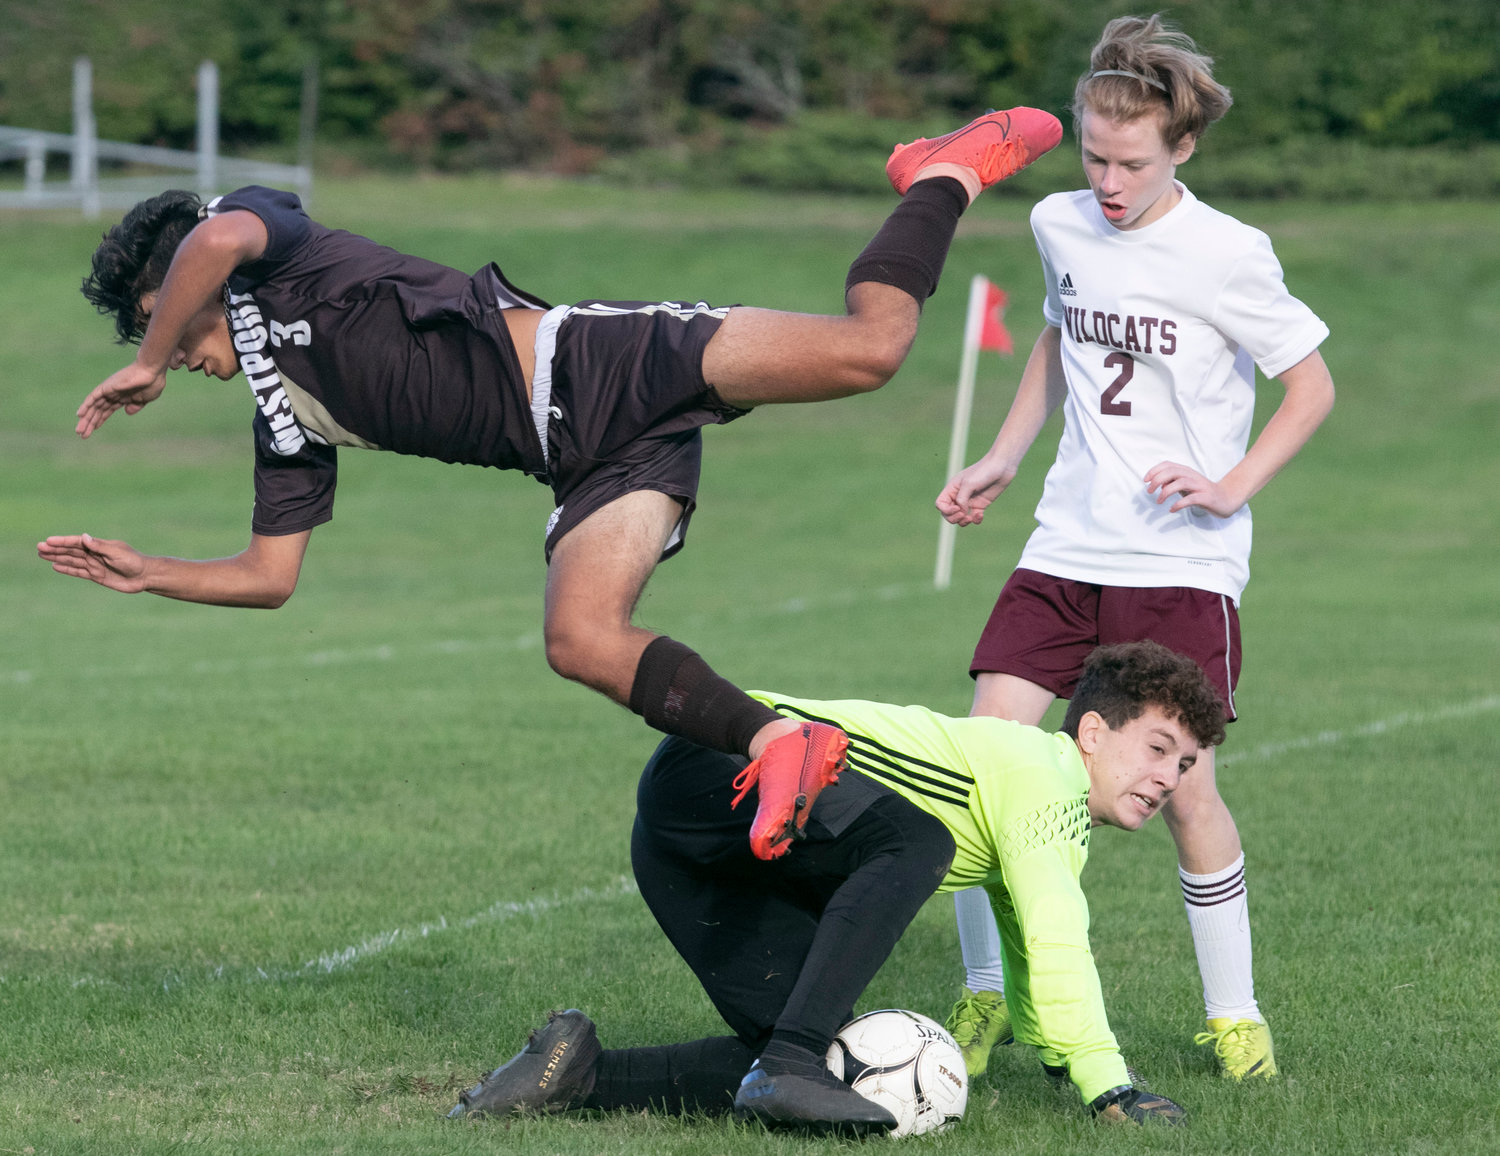 Midfielder, Antonio Dutra-Africano is upended by the West Bridgewater goalkeeper as he attempts to score in the second half.